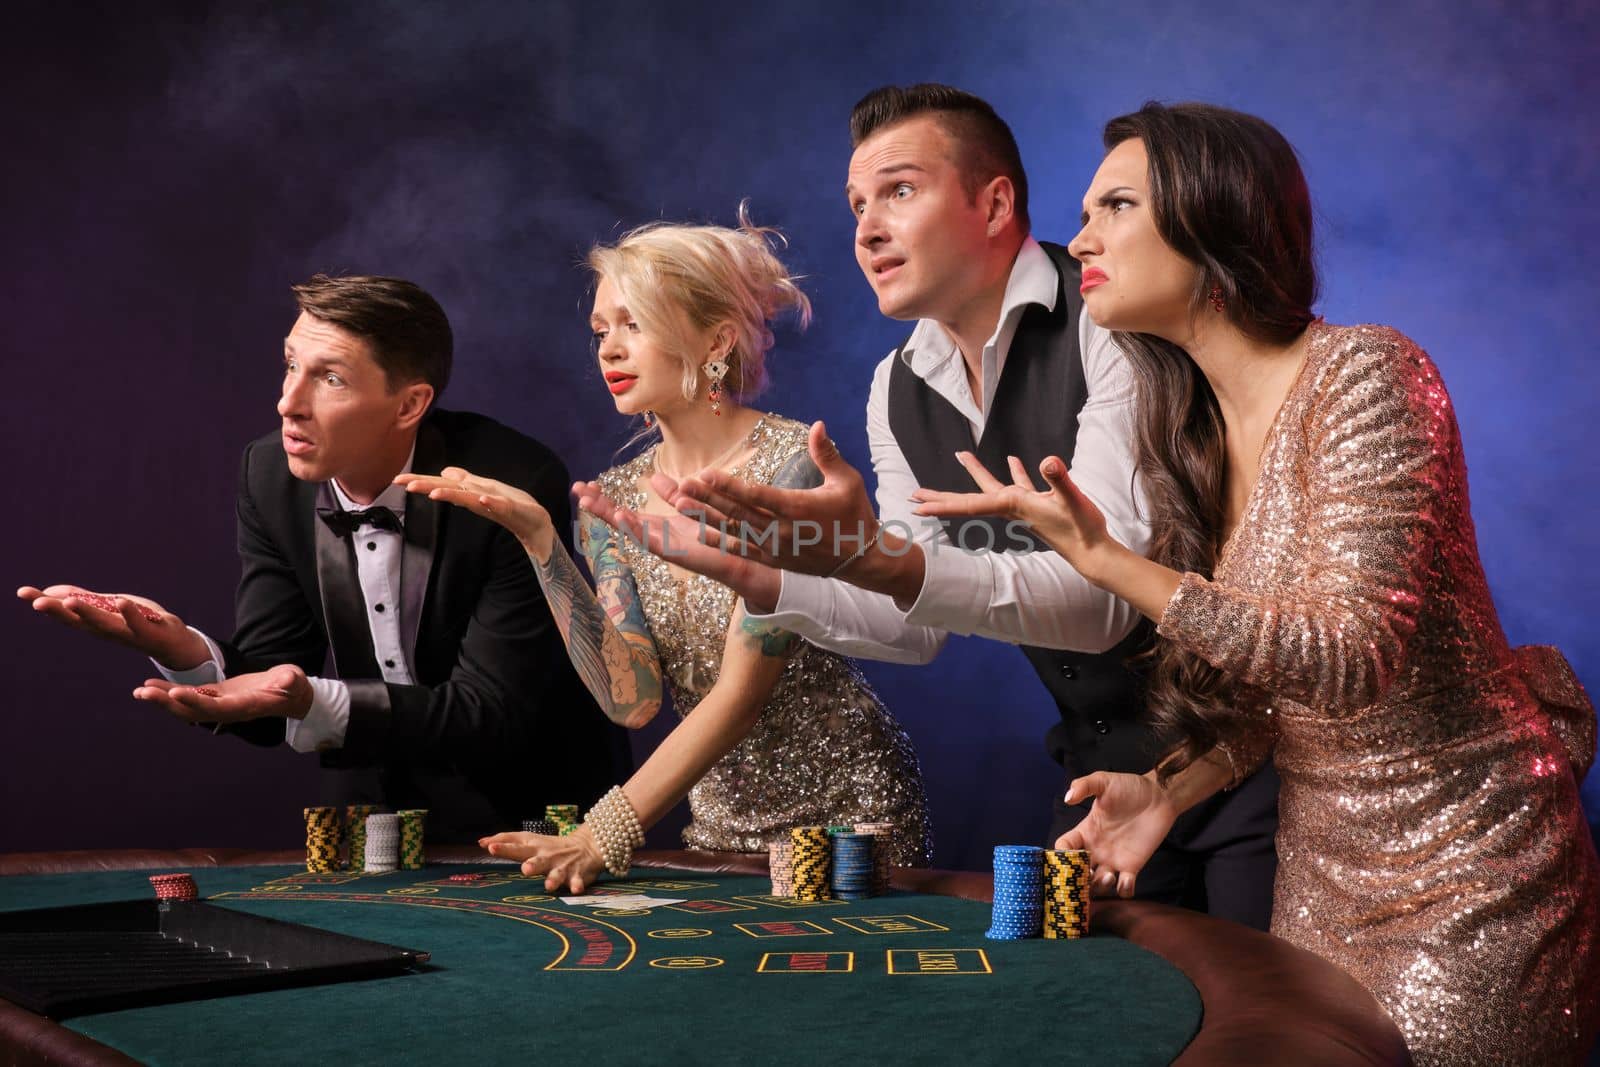 Side shot of an upset rich colleagues playing poker at casino in smoke. Youth are making bets waiting for a big win. They are looking unhappy standing at the table against a red and blue backlights on black background. Risky gambling entertainment.